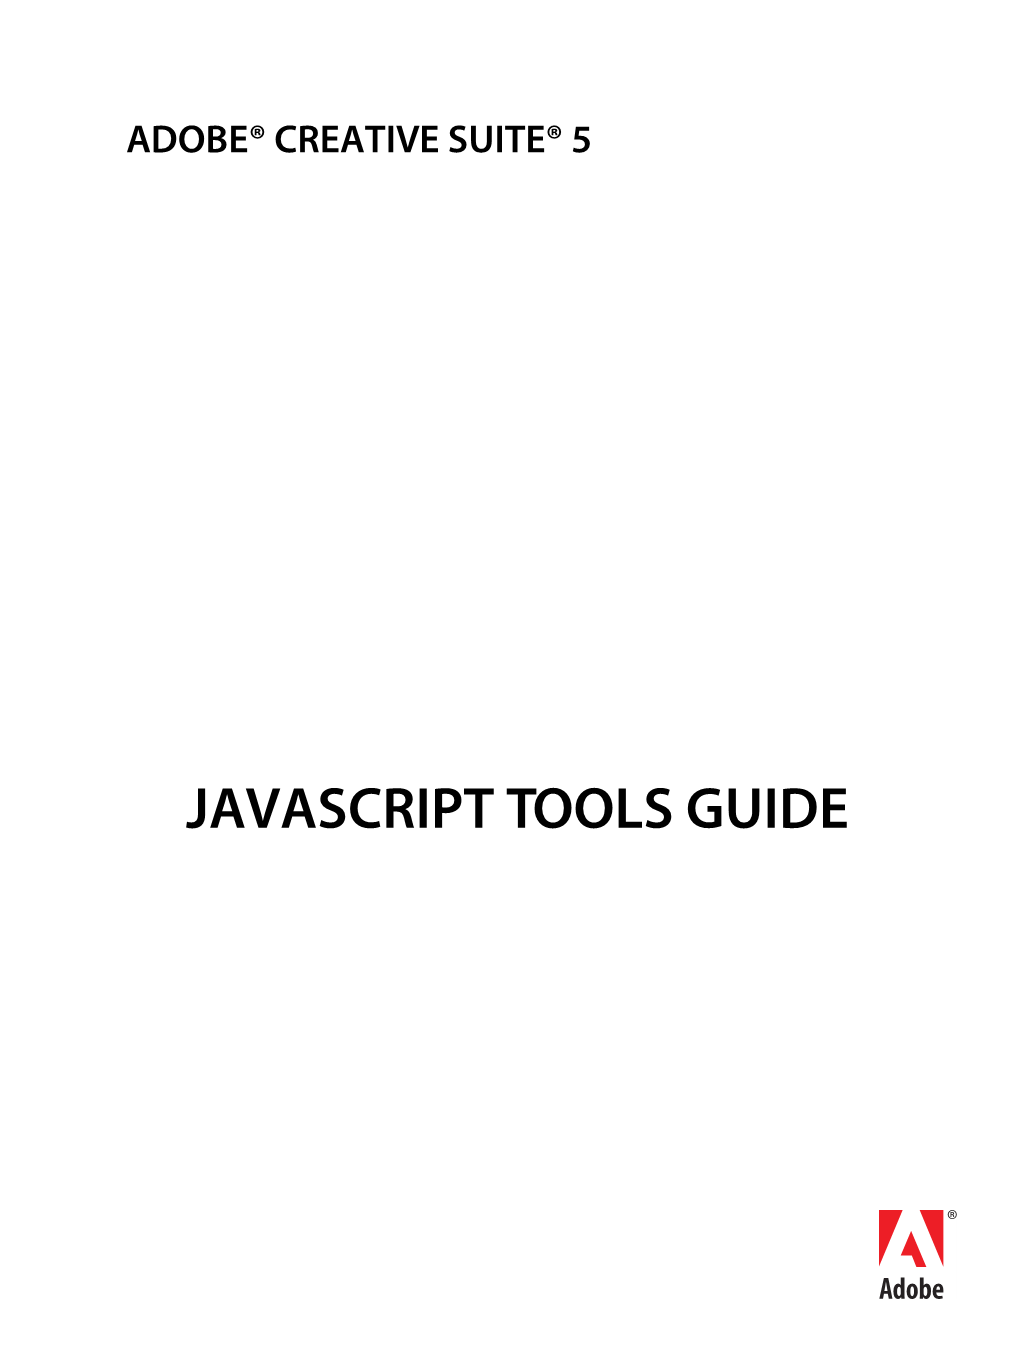 JAVASCRIPT TOOLS GUIDE © 2010 Adobe Systems Incorporated